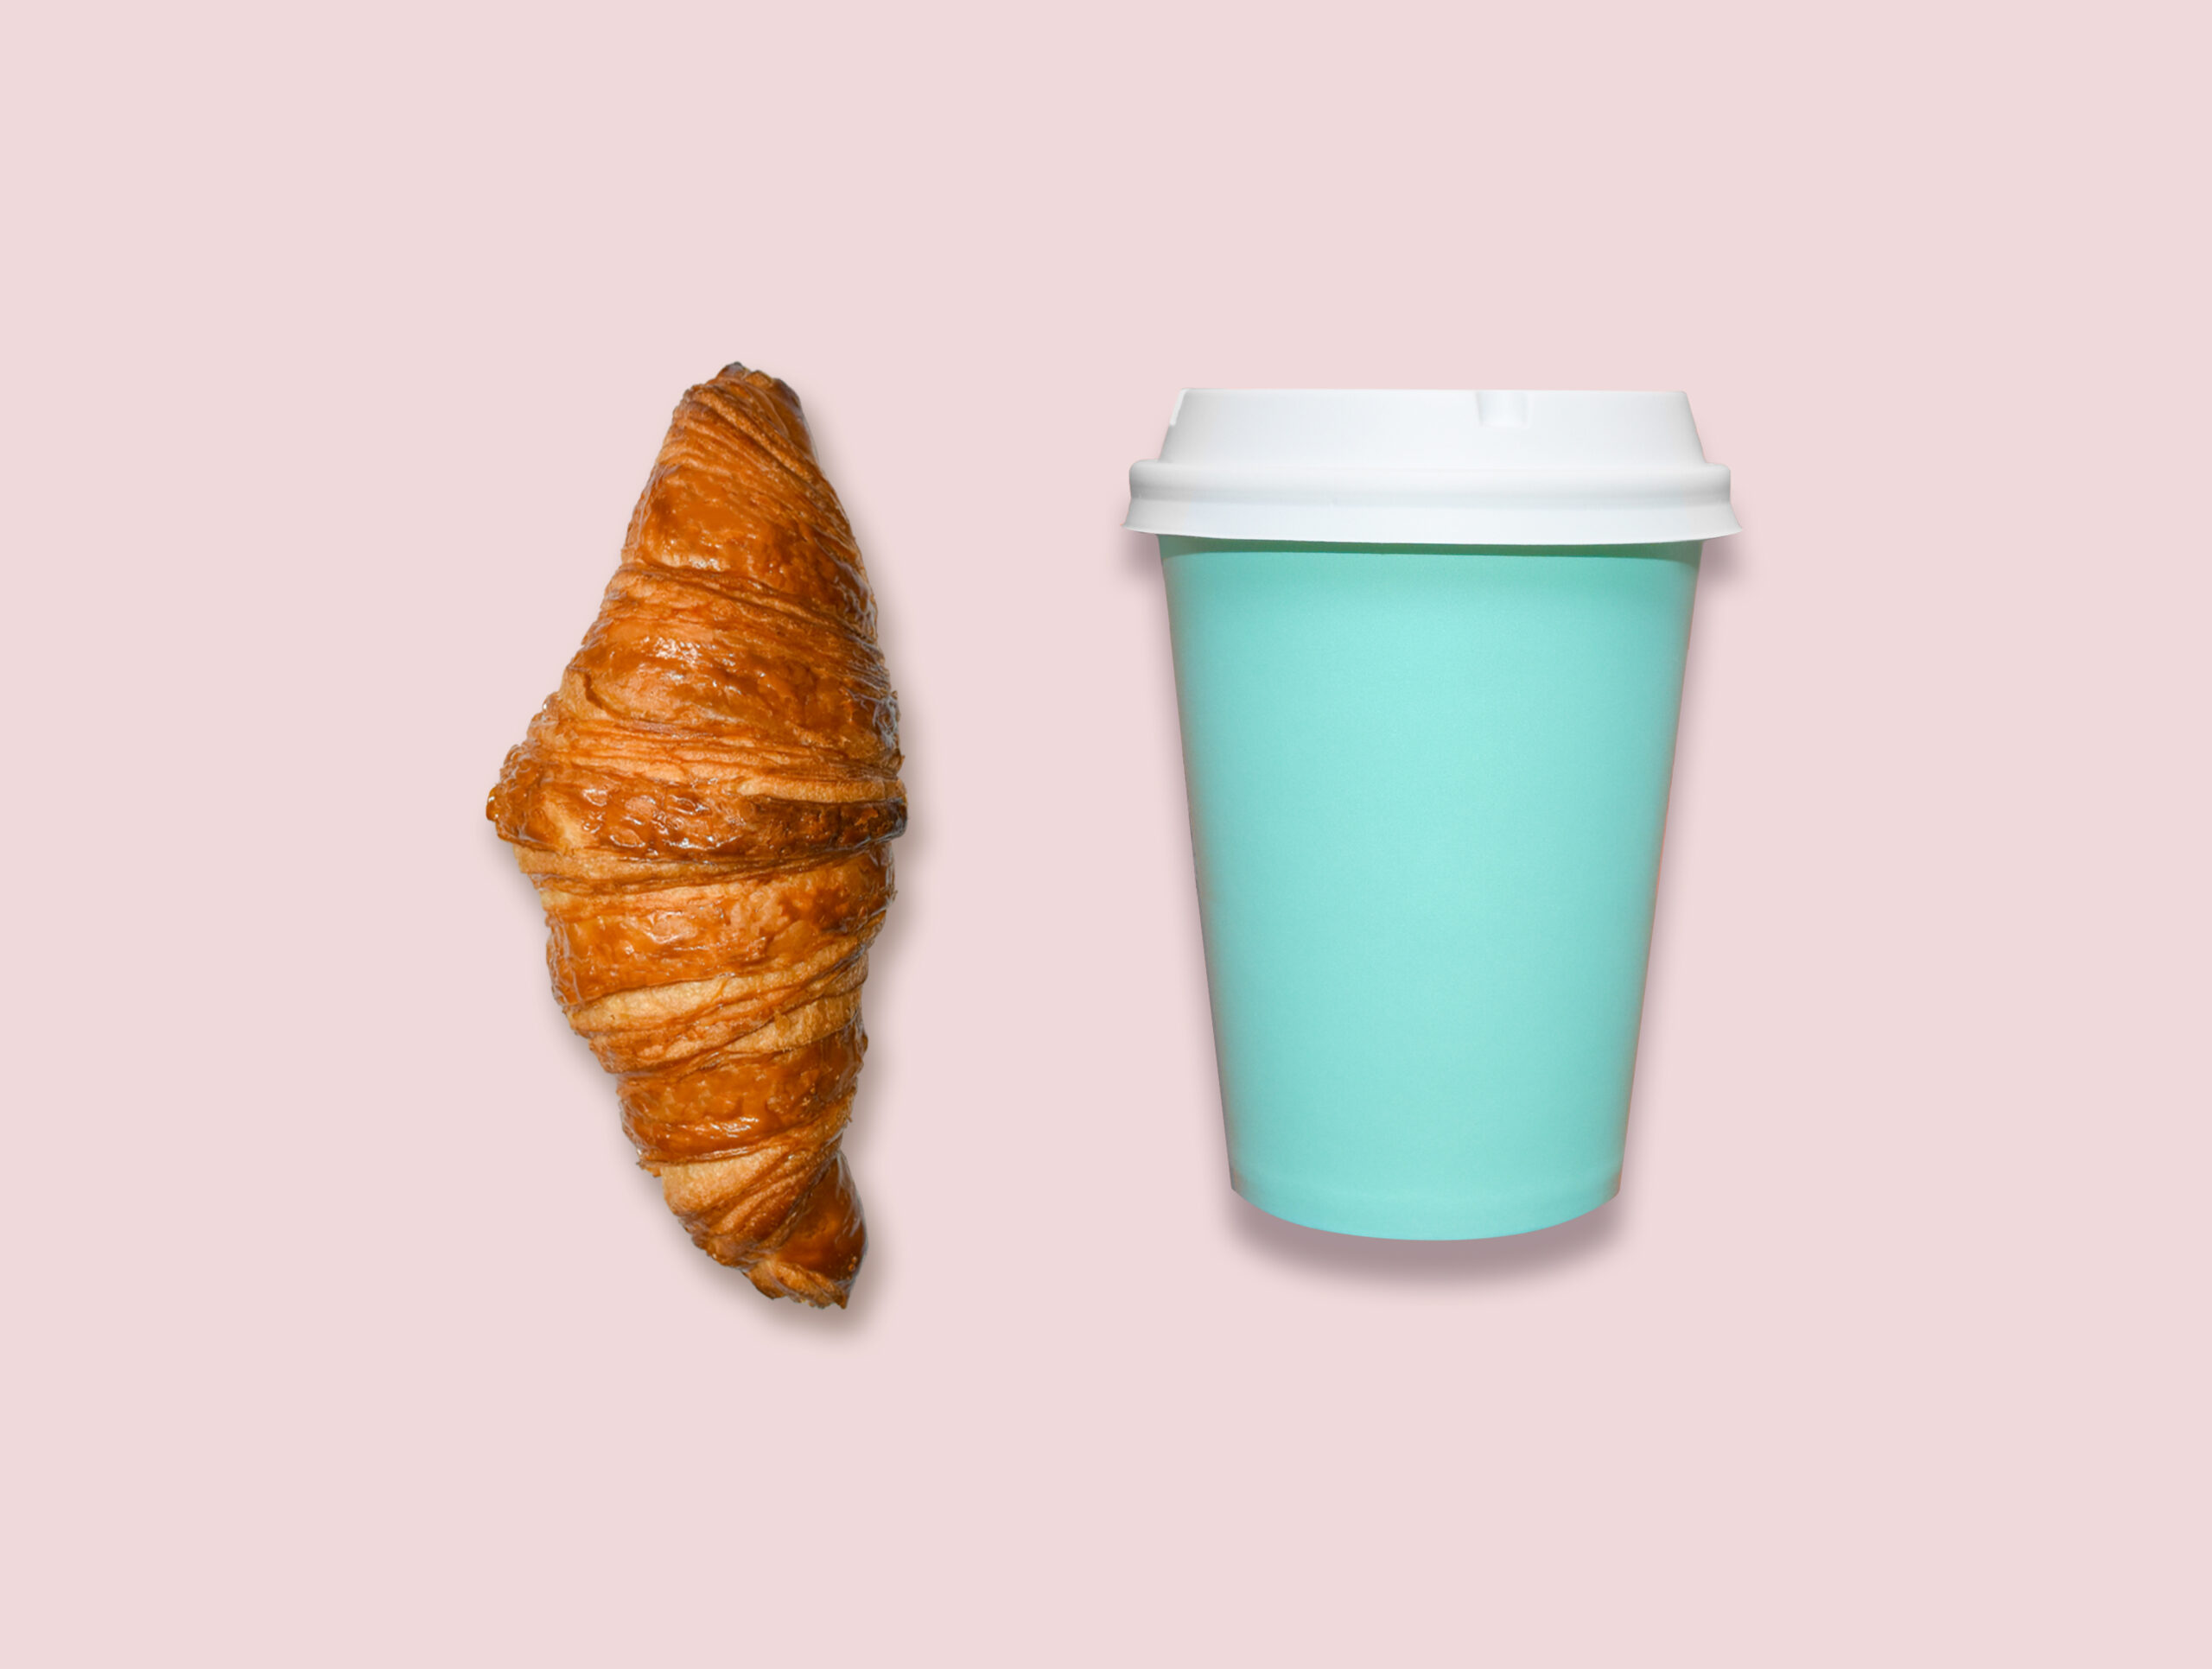 Fresh home made croissant and cappuccino take away cup on pink table, top view.